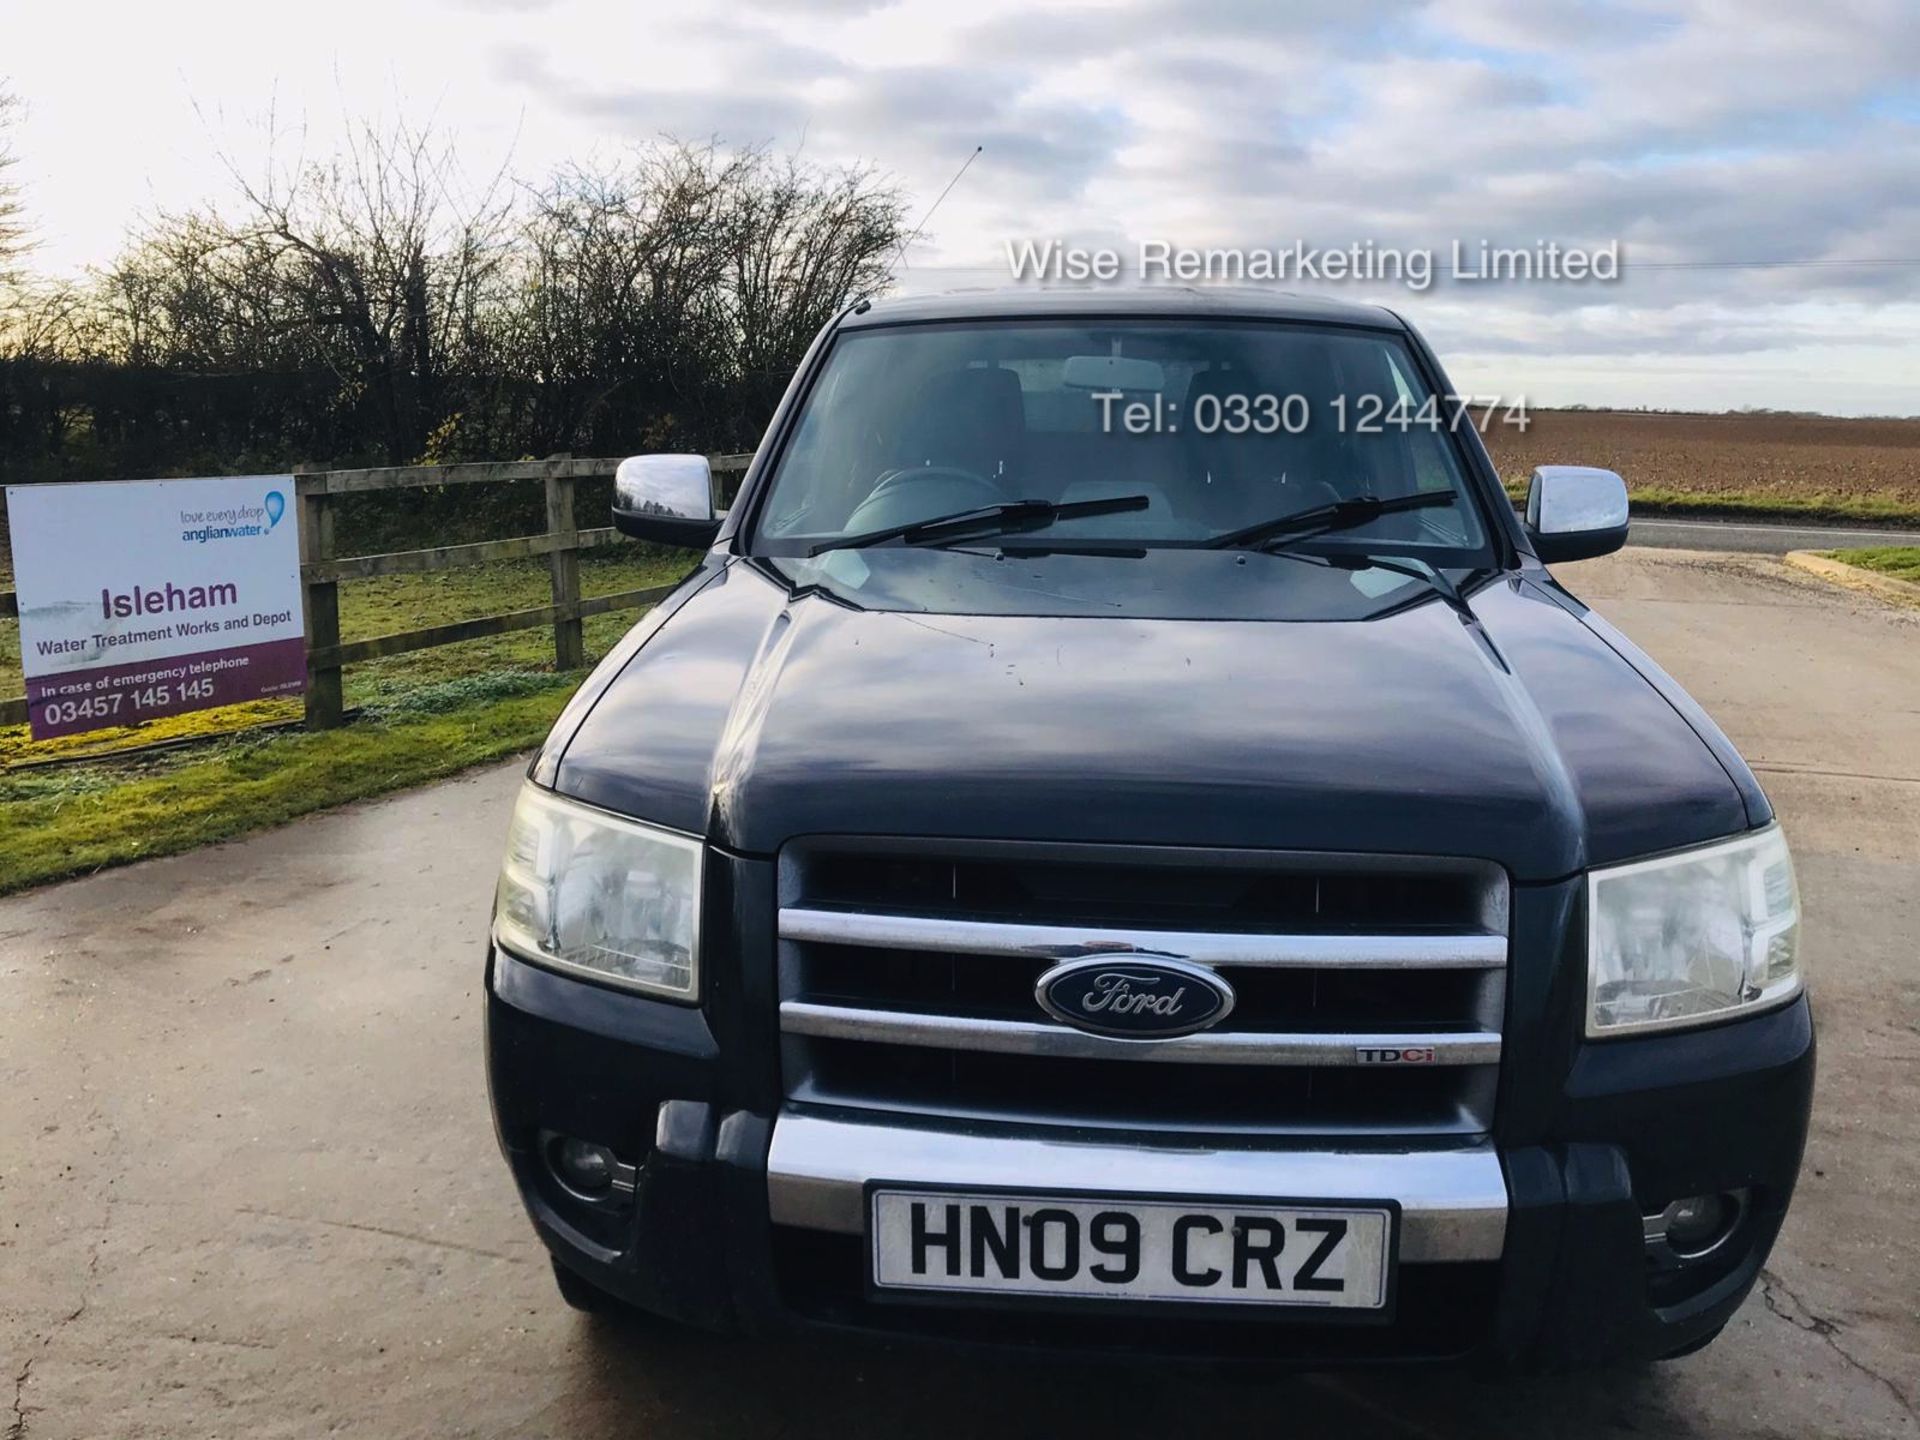 Ford Ranger Thunder 2.5 Double Cab Pick Up - 2009 09 Reg - 4x4 - Service History - Full Leather - Image 5 of 17